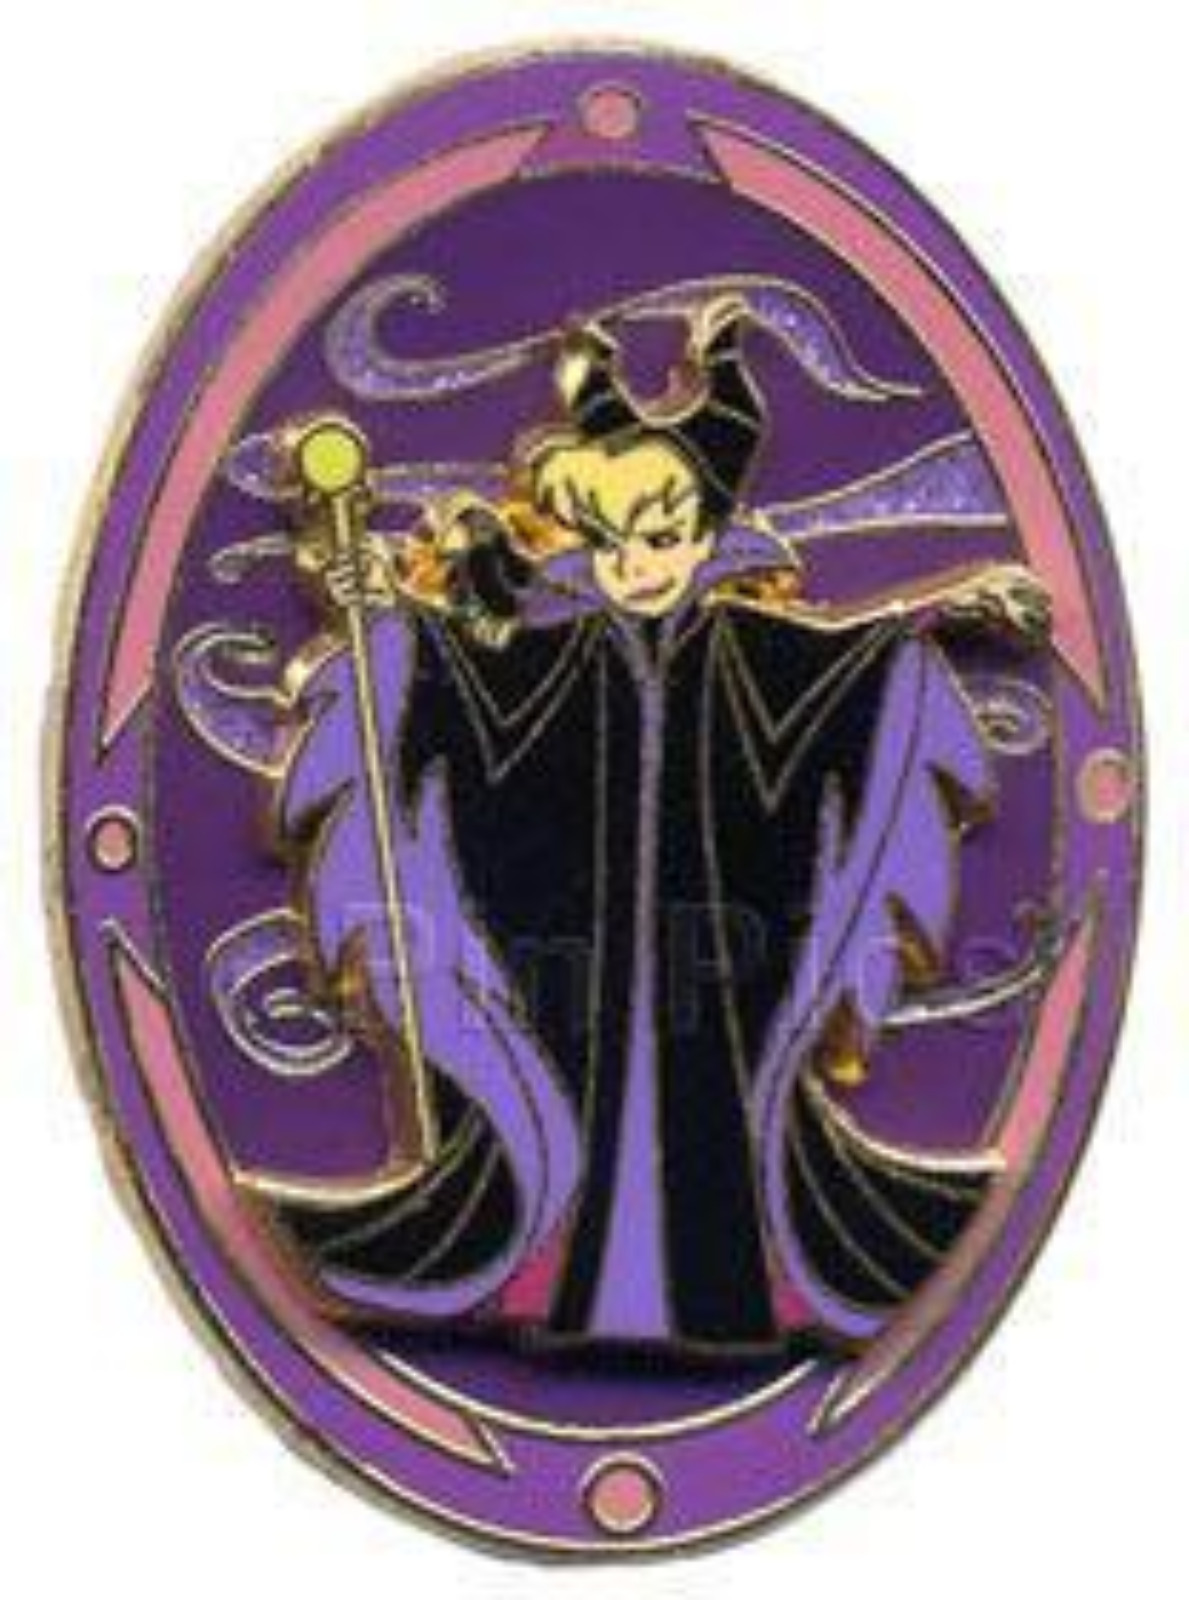 Disney Pin 38661 DLRP Tinker Bell as Maleficent Fairy Tink Paris France LE 1200